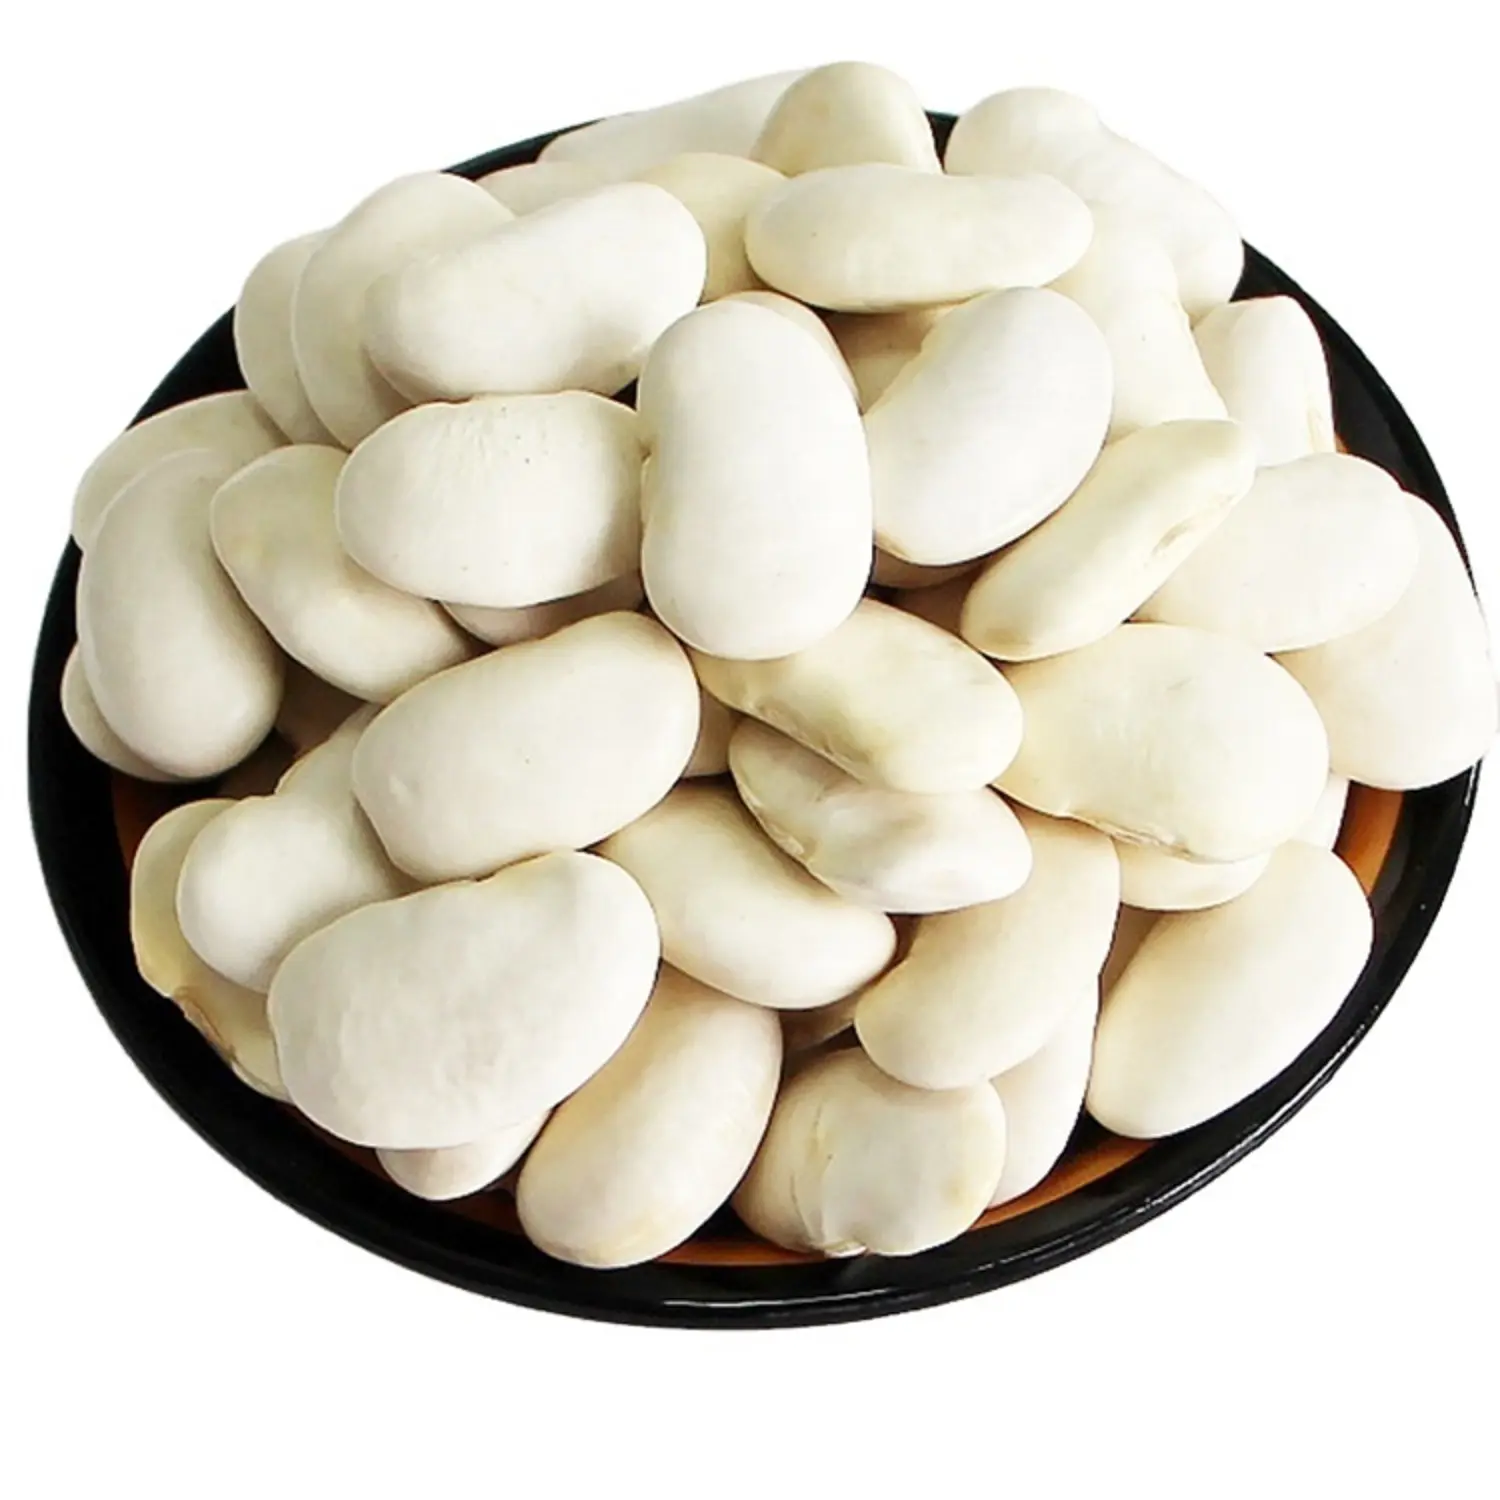 White Kidney Beans Factory Price White Kidney Beans In Wholesale